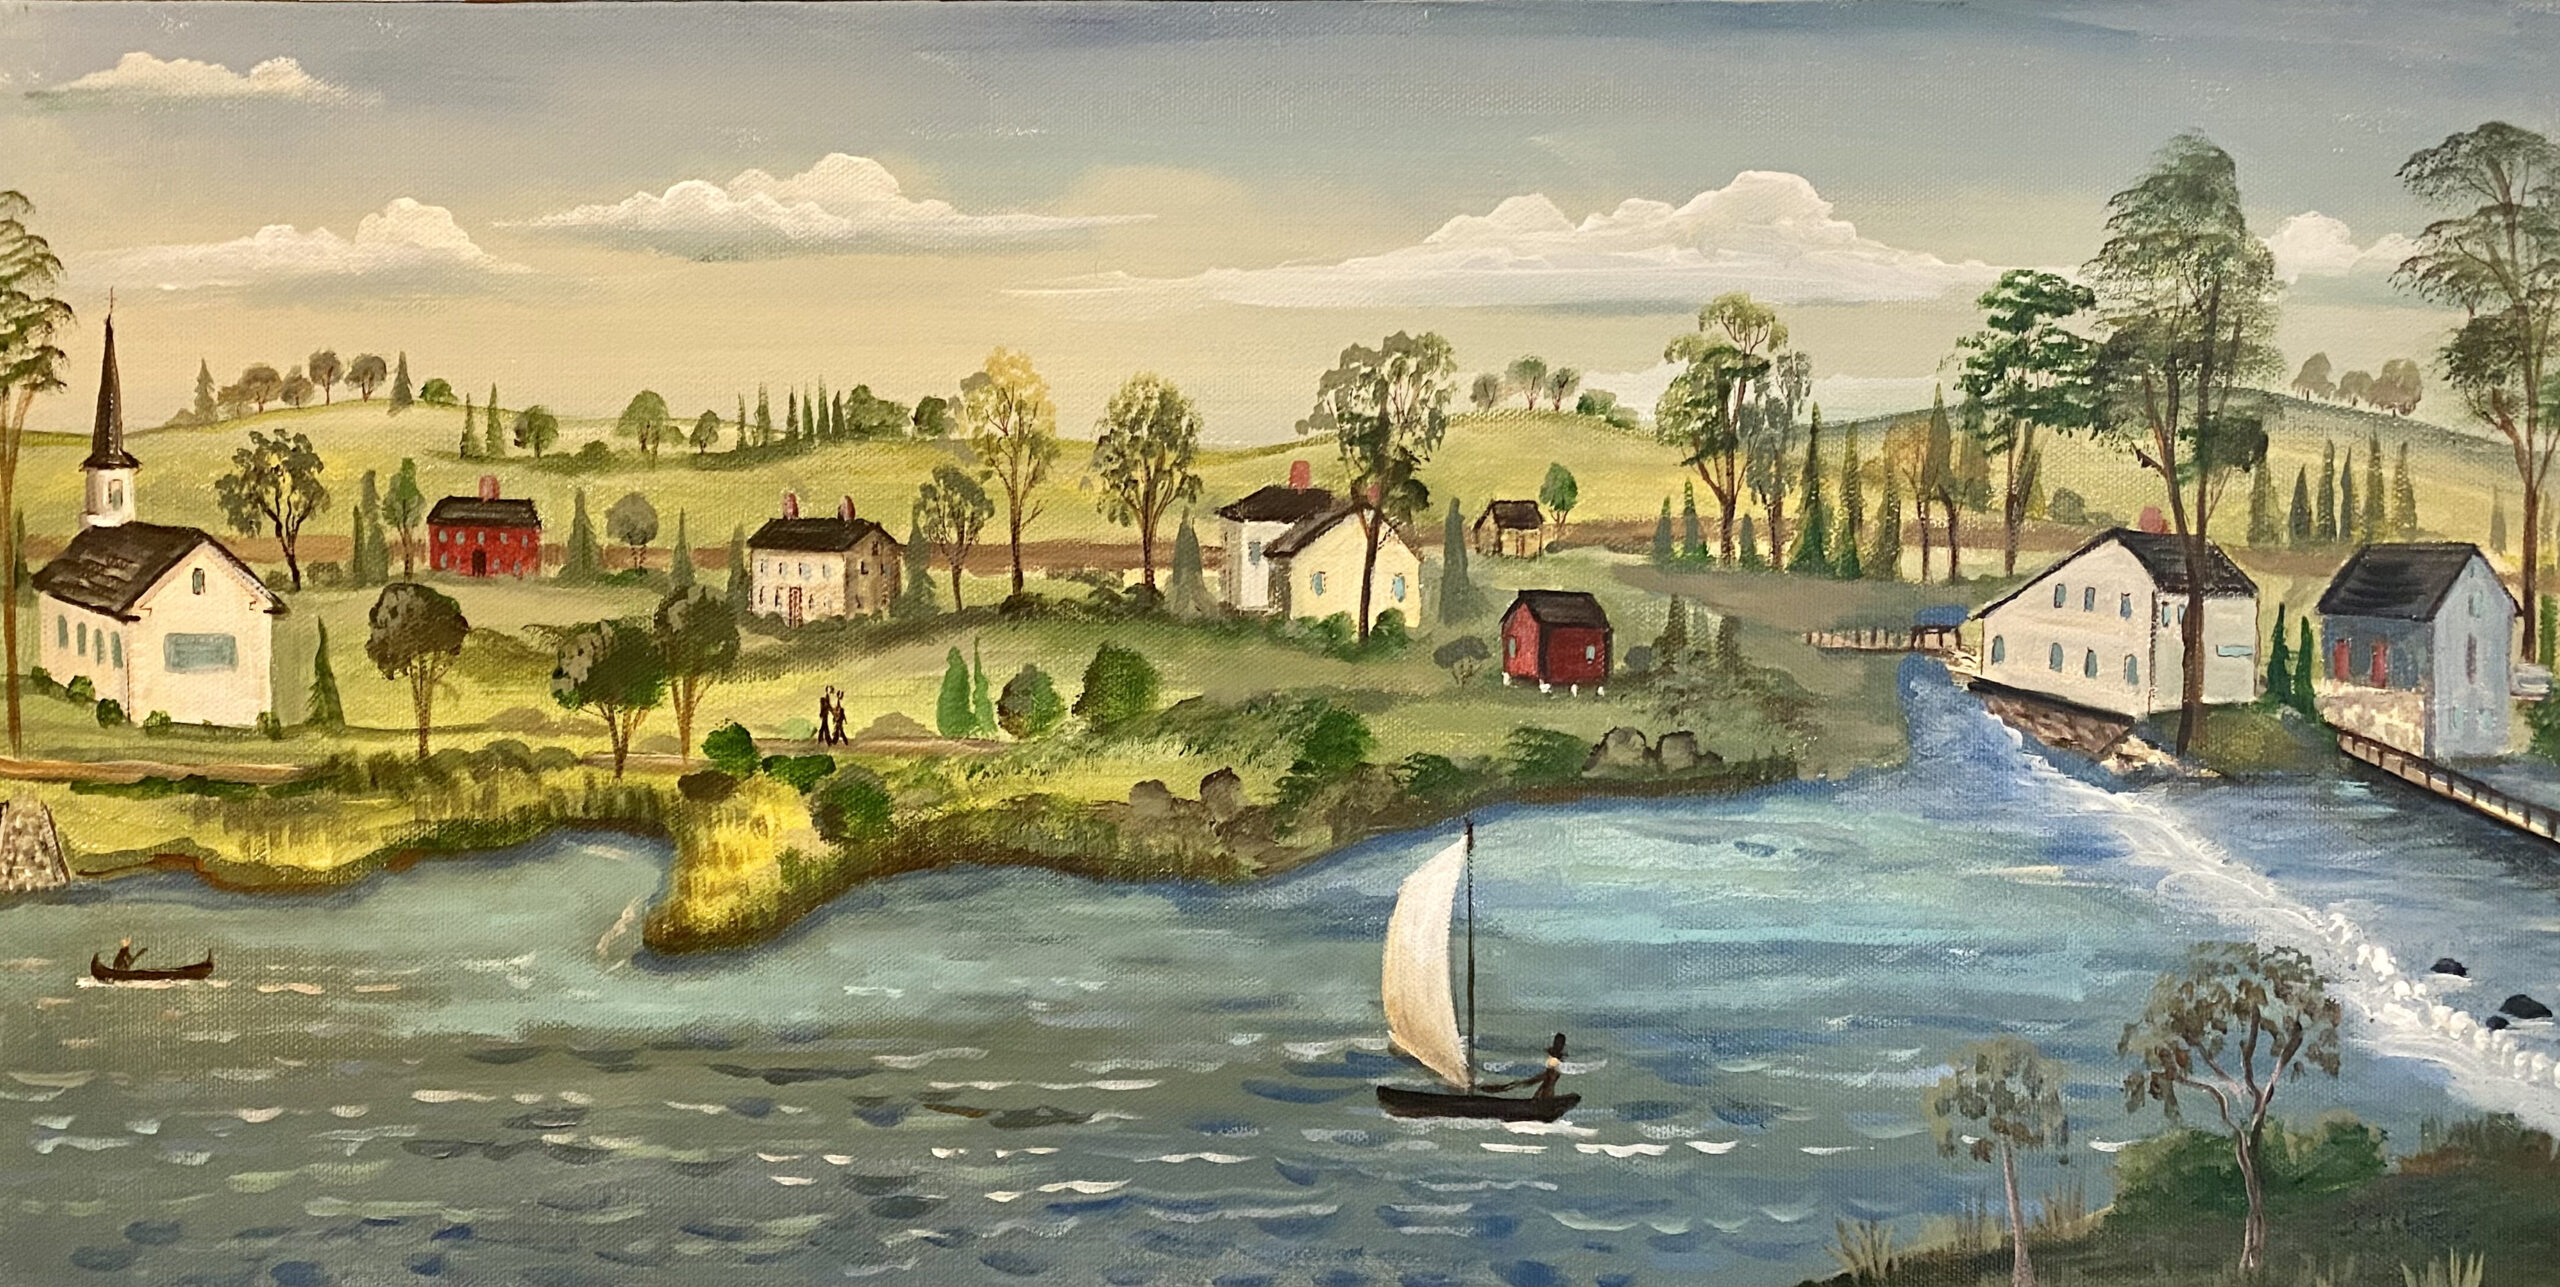 Early American Painting – Old Harbor Village